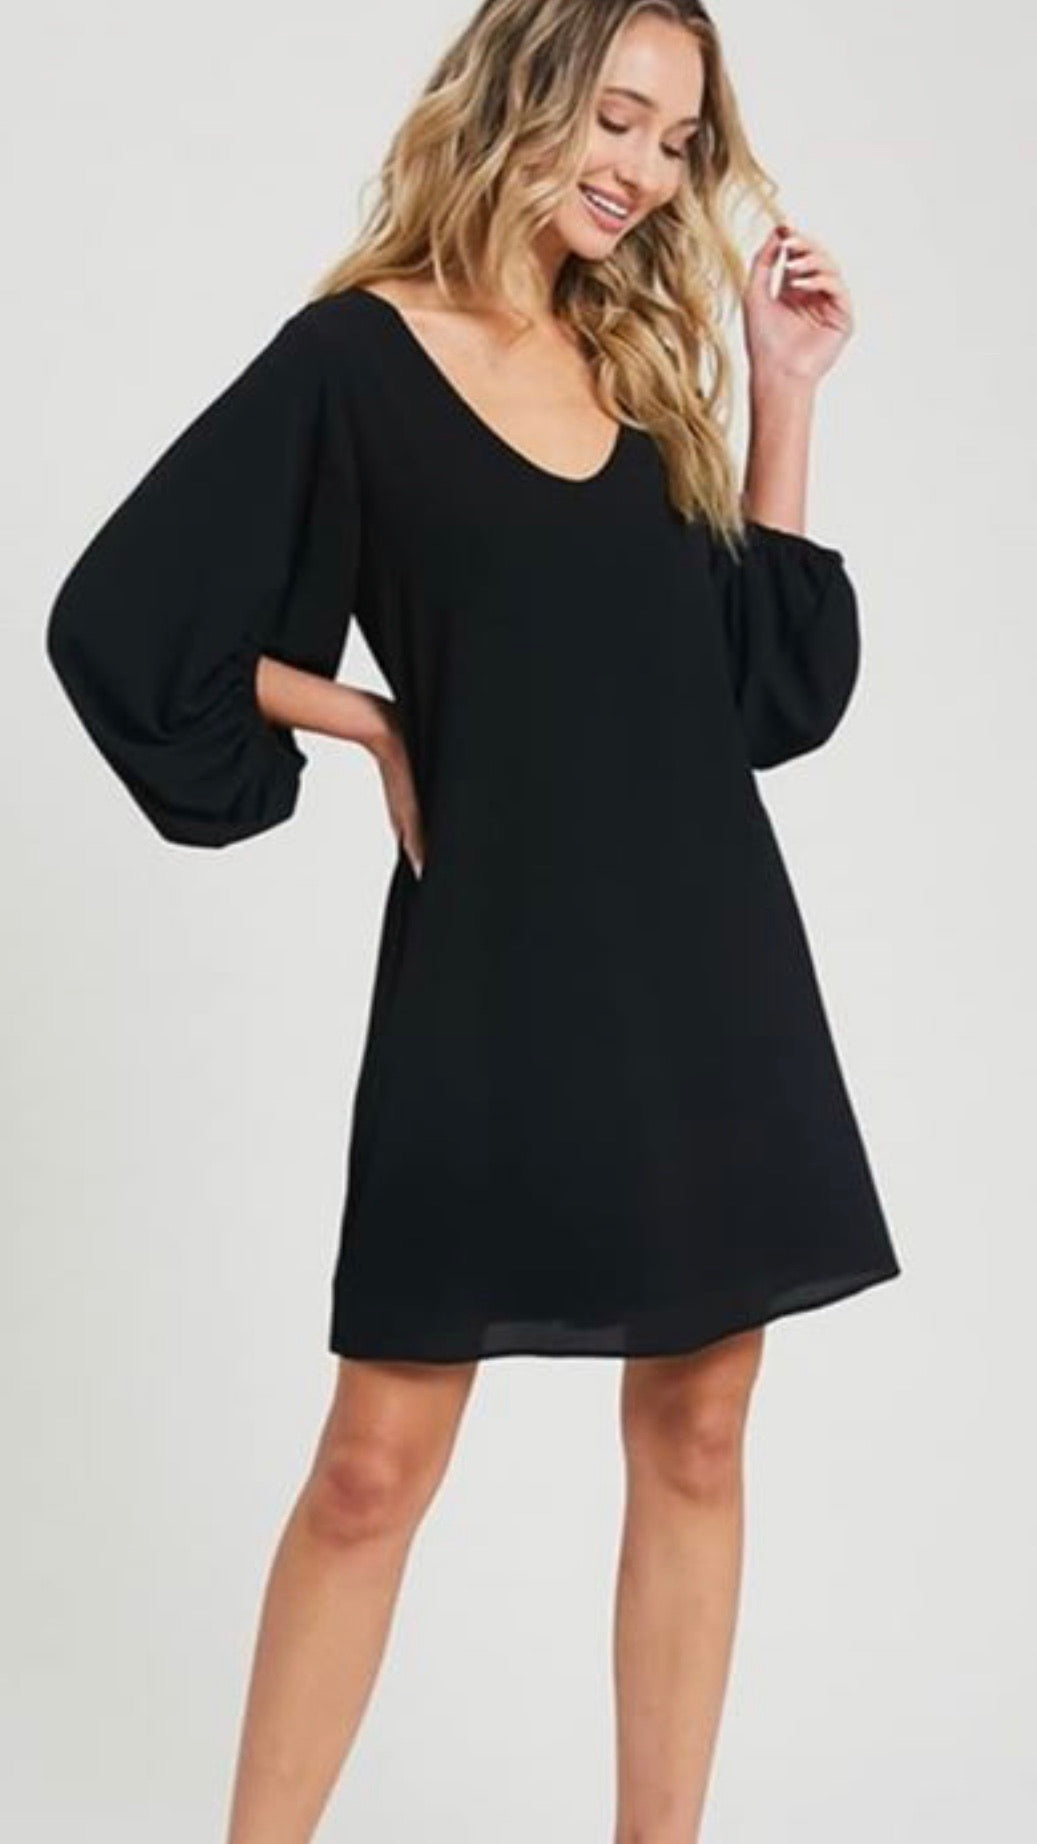 Chrissie V-neck Bubble Sleeve Dress - Corinne an Affordable Women's Clothing Boutique in the US USA